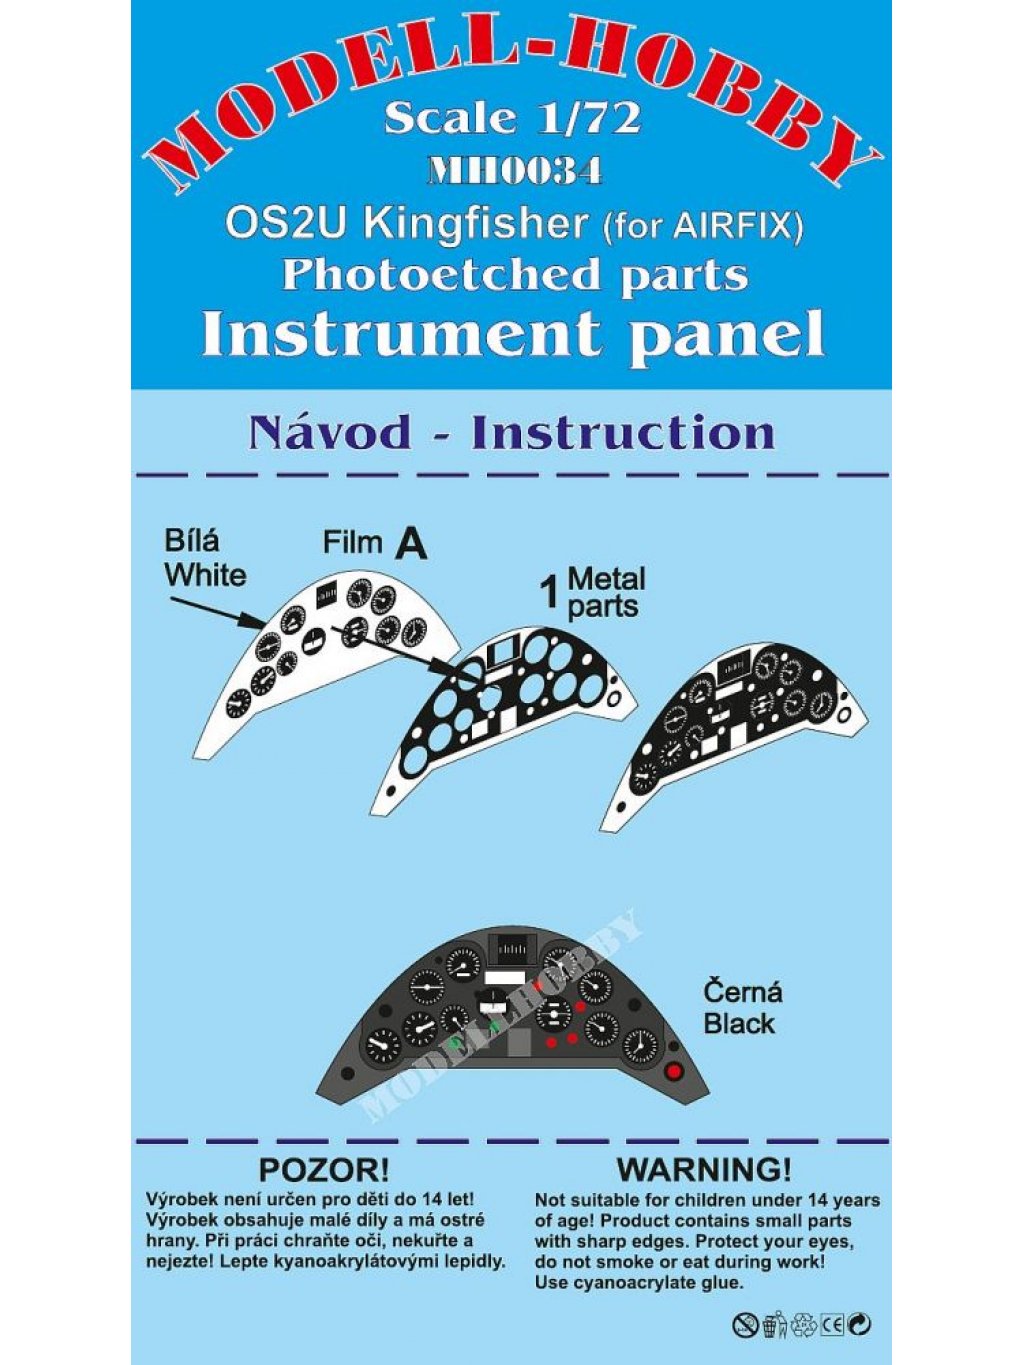 Vought OS2U Kingfisher Photoetched parts instrument panel for Airfix ex Modell-Hobby